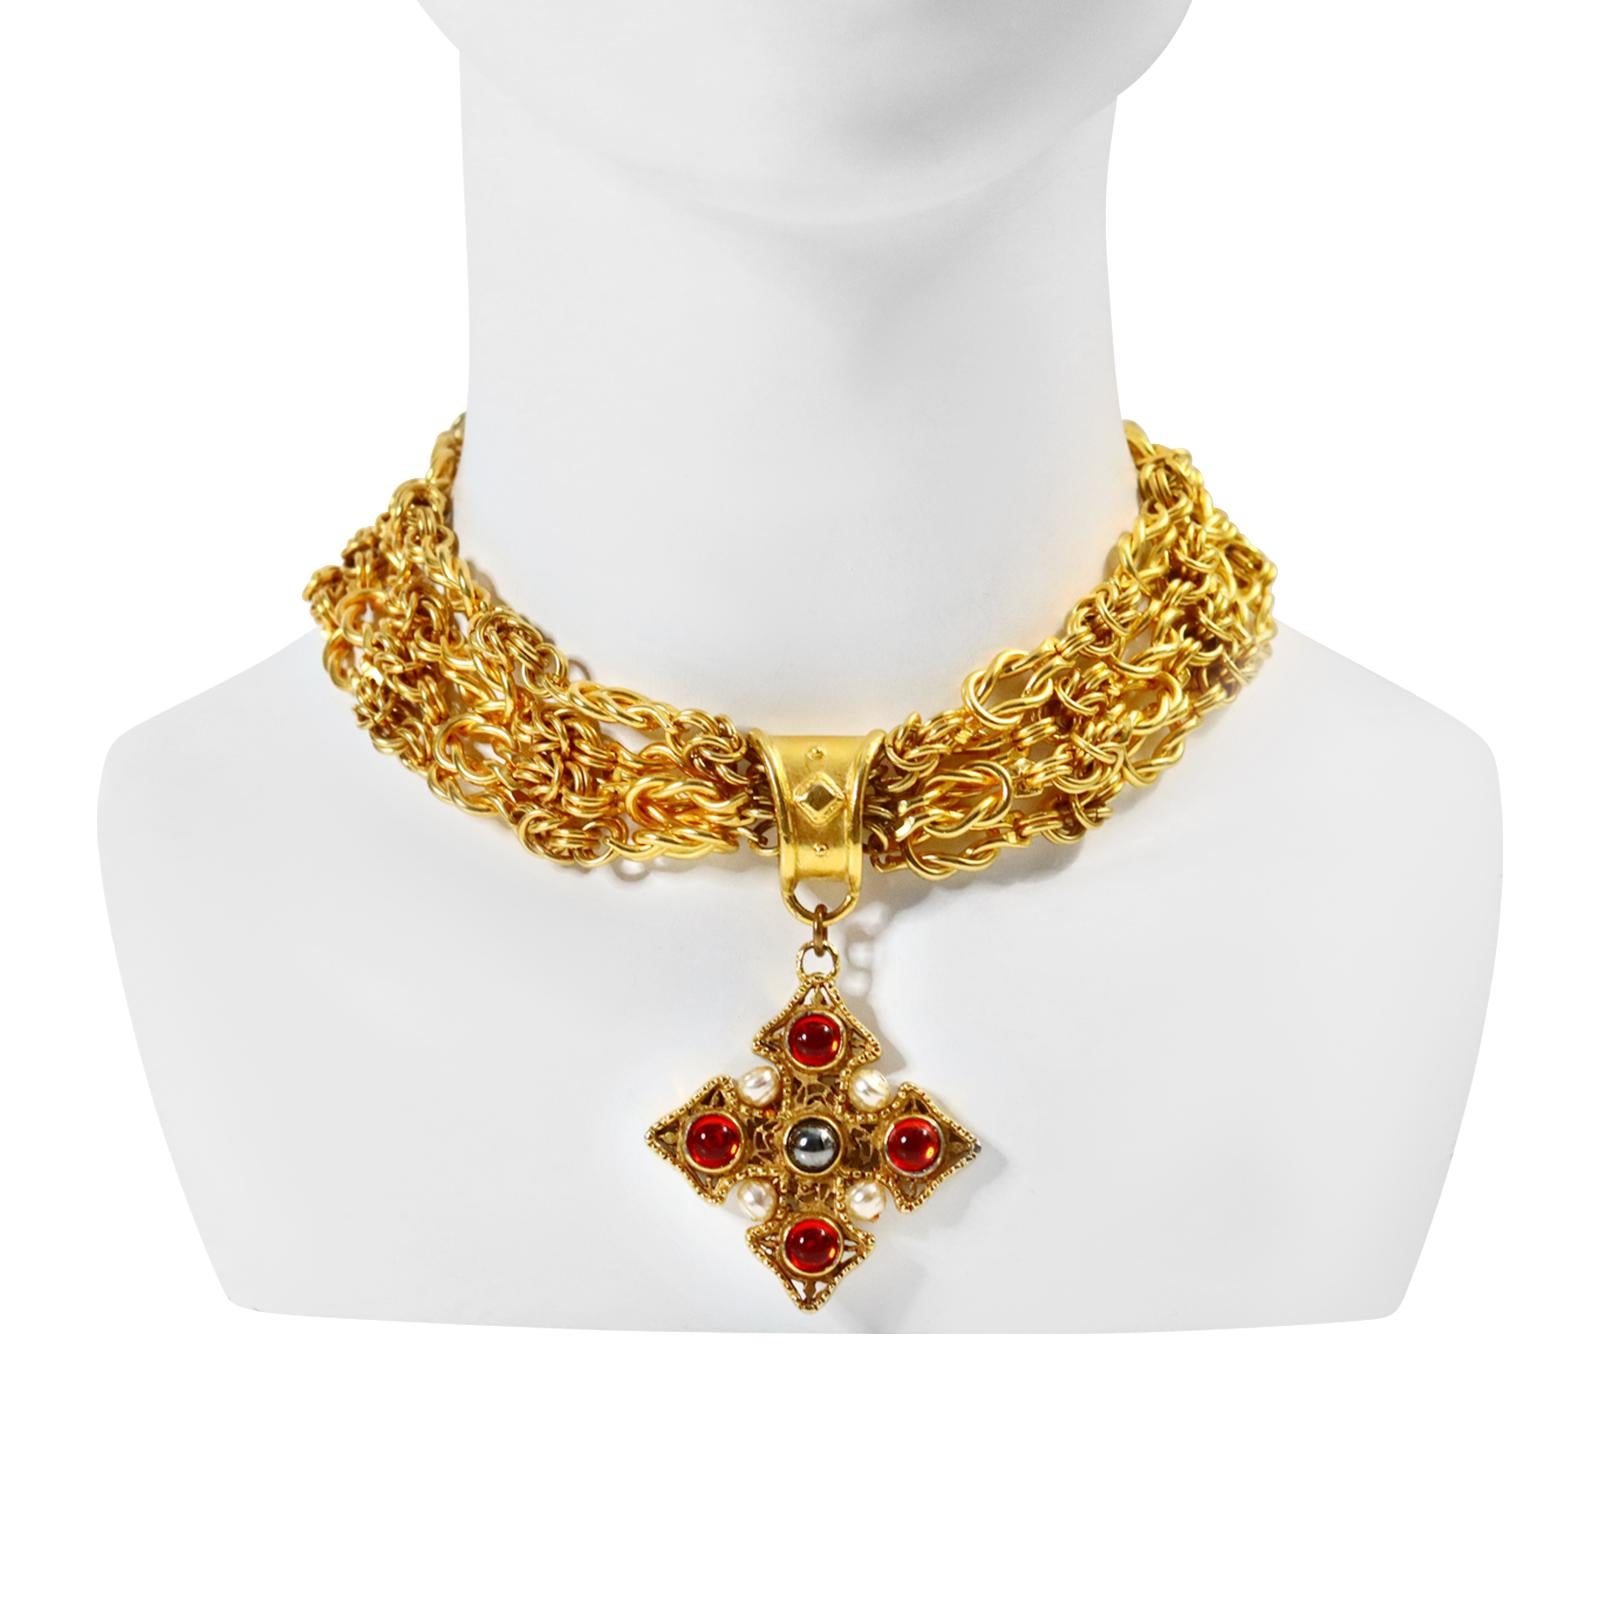 Vintage Prevost Gold Tone 4 strand Choker Necklace with Dangling Maltese Cross. There are 4 heavy link chains that make this necklace up with a piece that has faux pearls and red and black shiny cabochons.  Quite substantial.  Really makes a